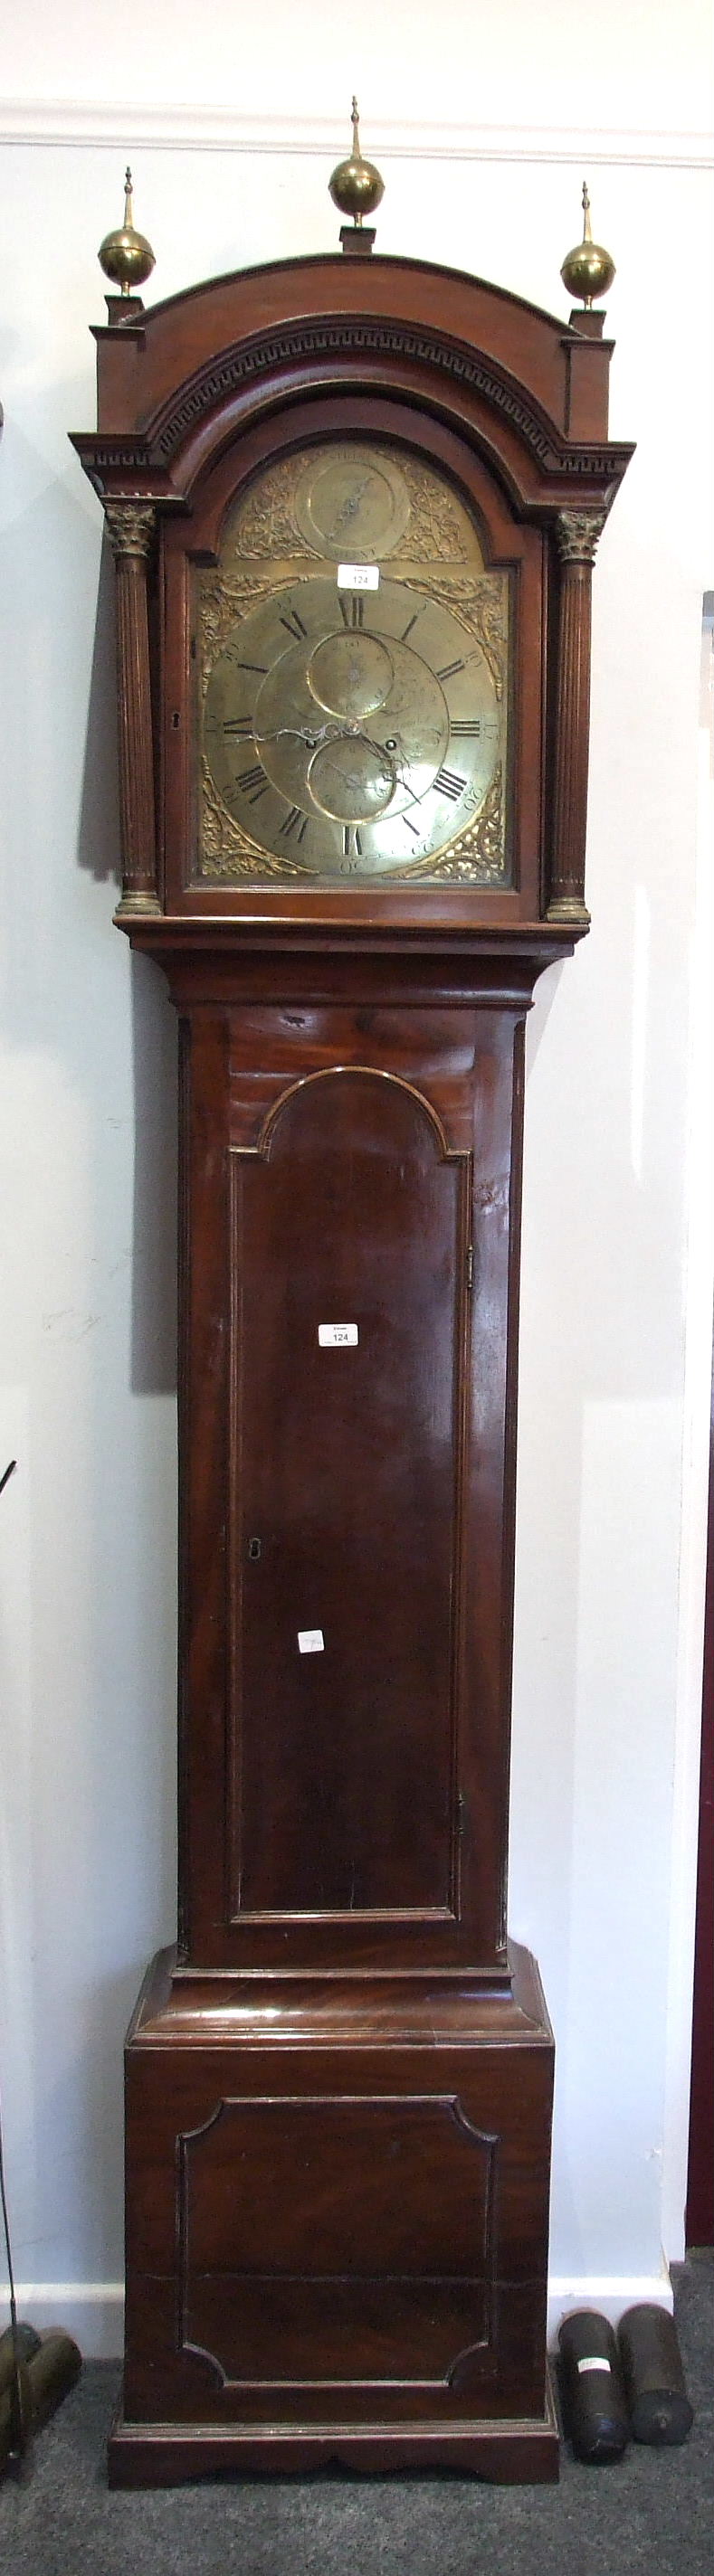 Robert Burfield, Arundel, a late-18th century mahogany long case clock, the case with two-stage